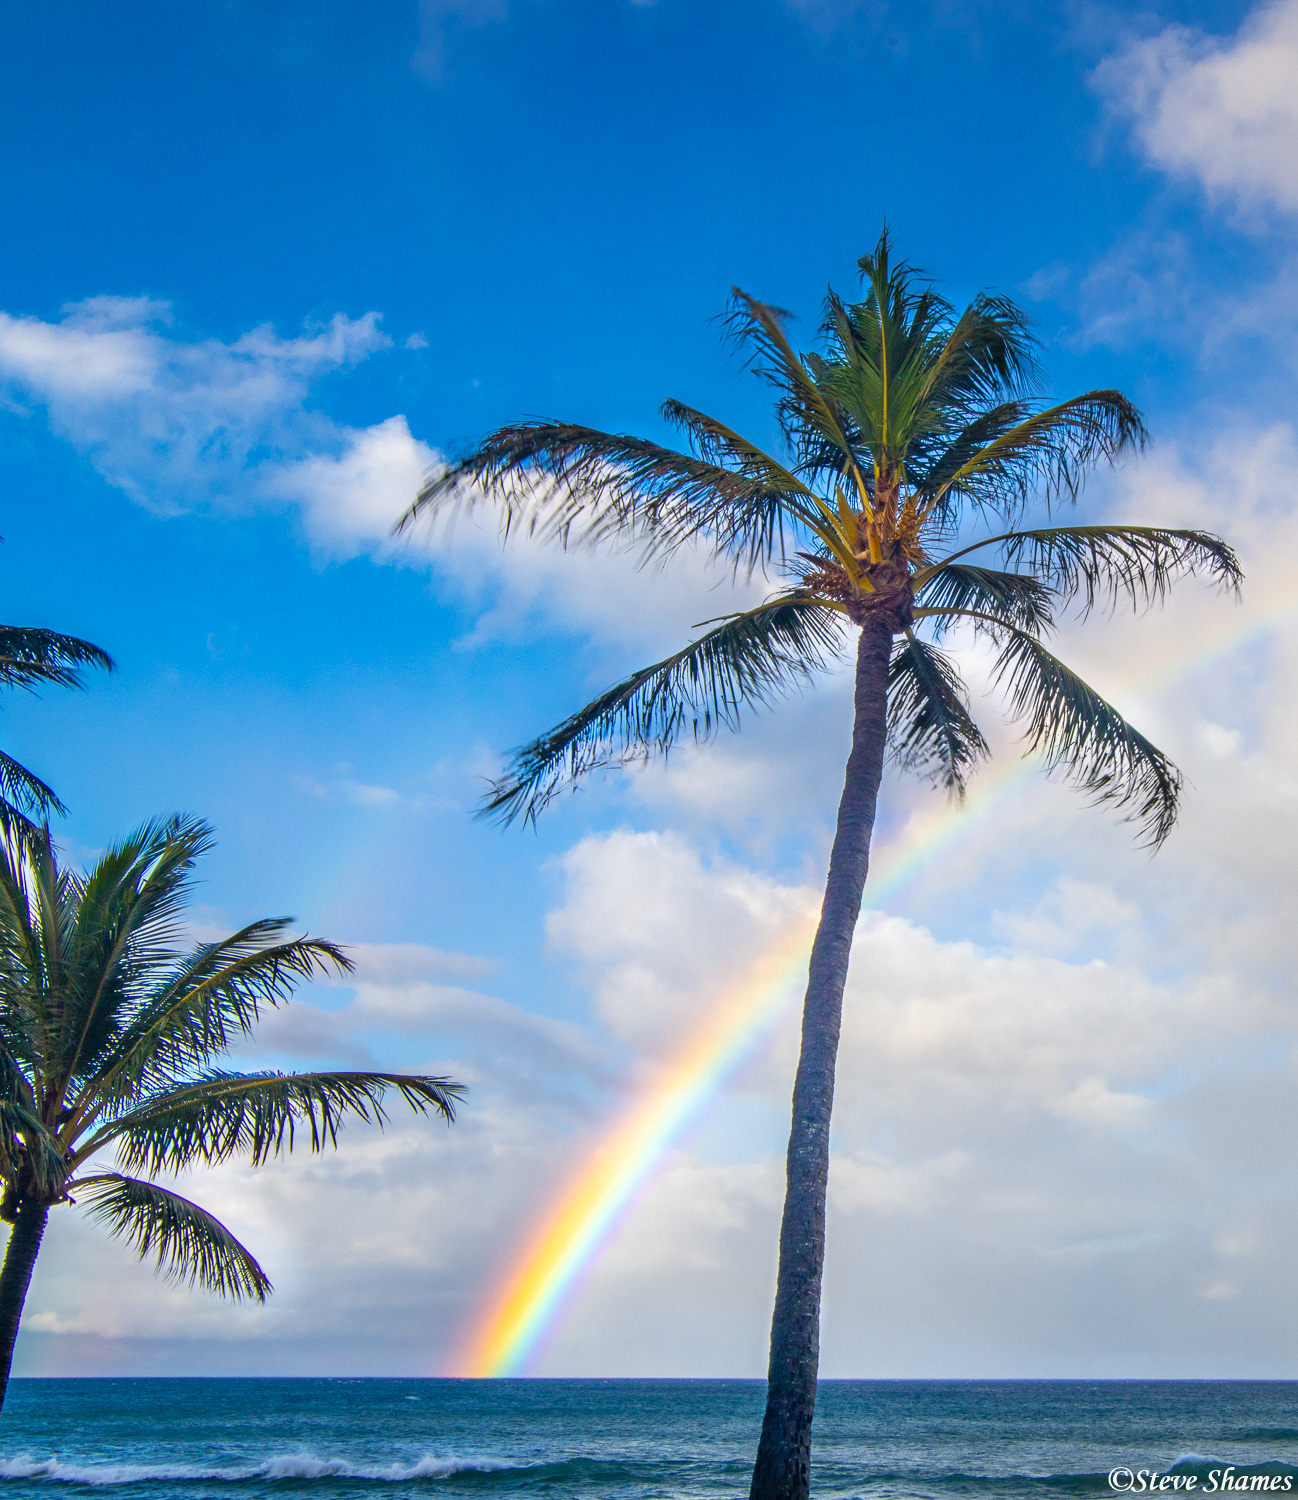 Rainbow rising out of the ocean off the shore of Lahaina, Maui.